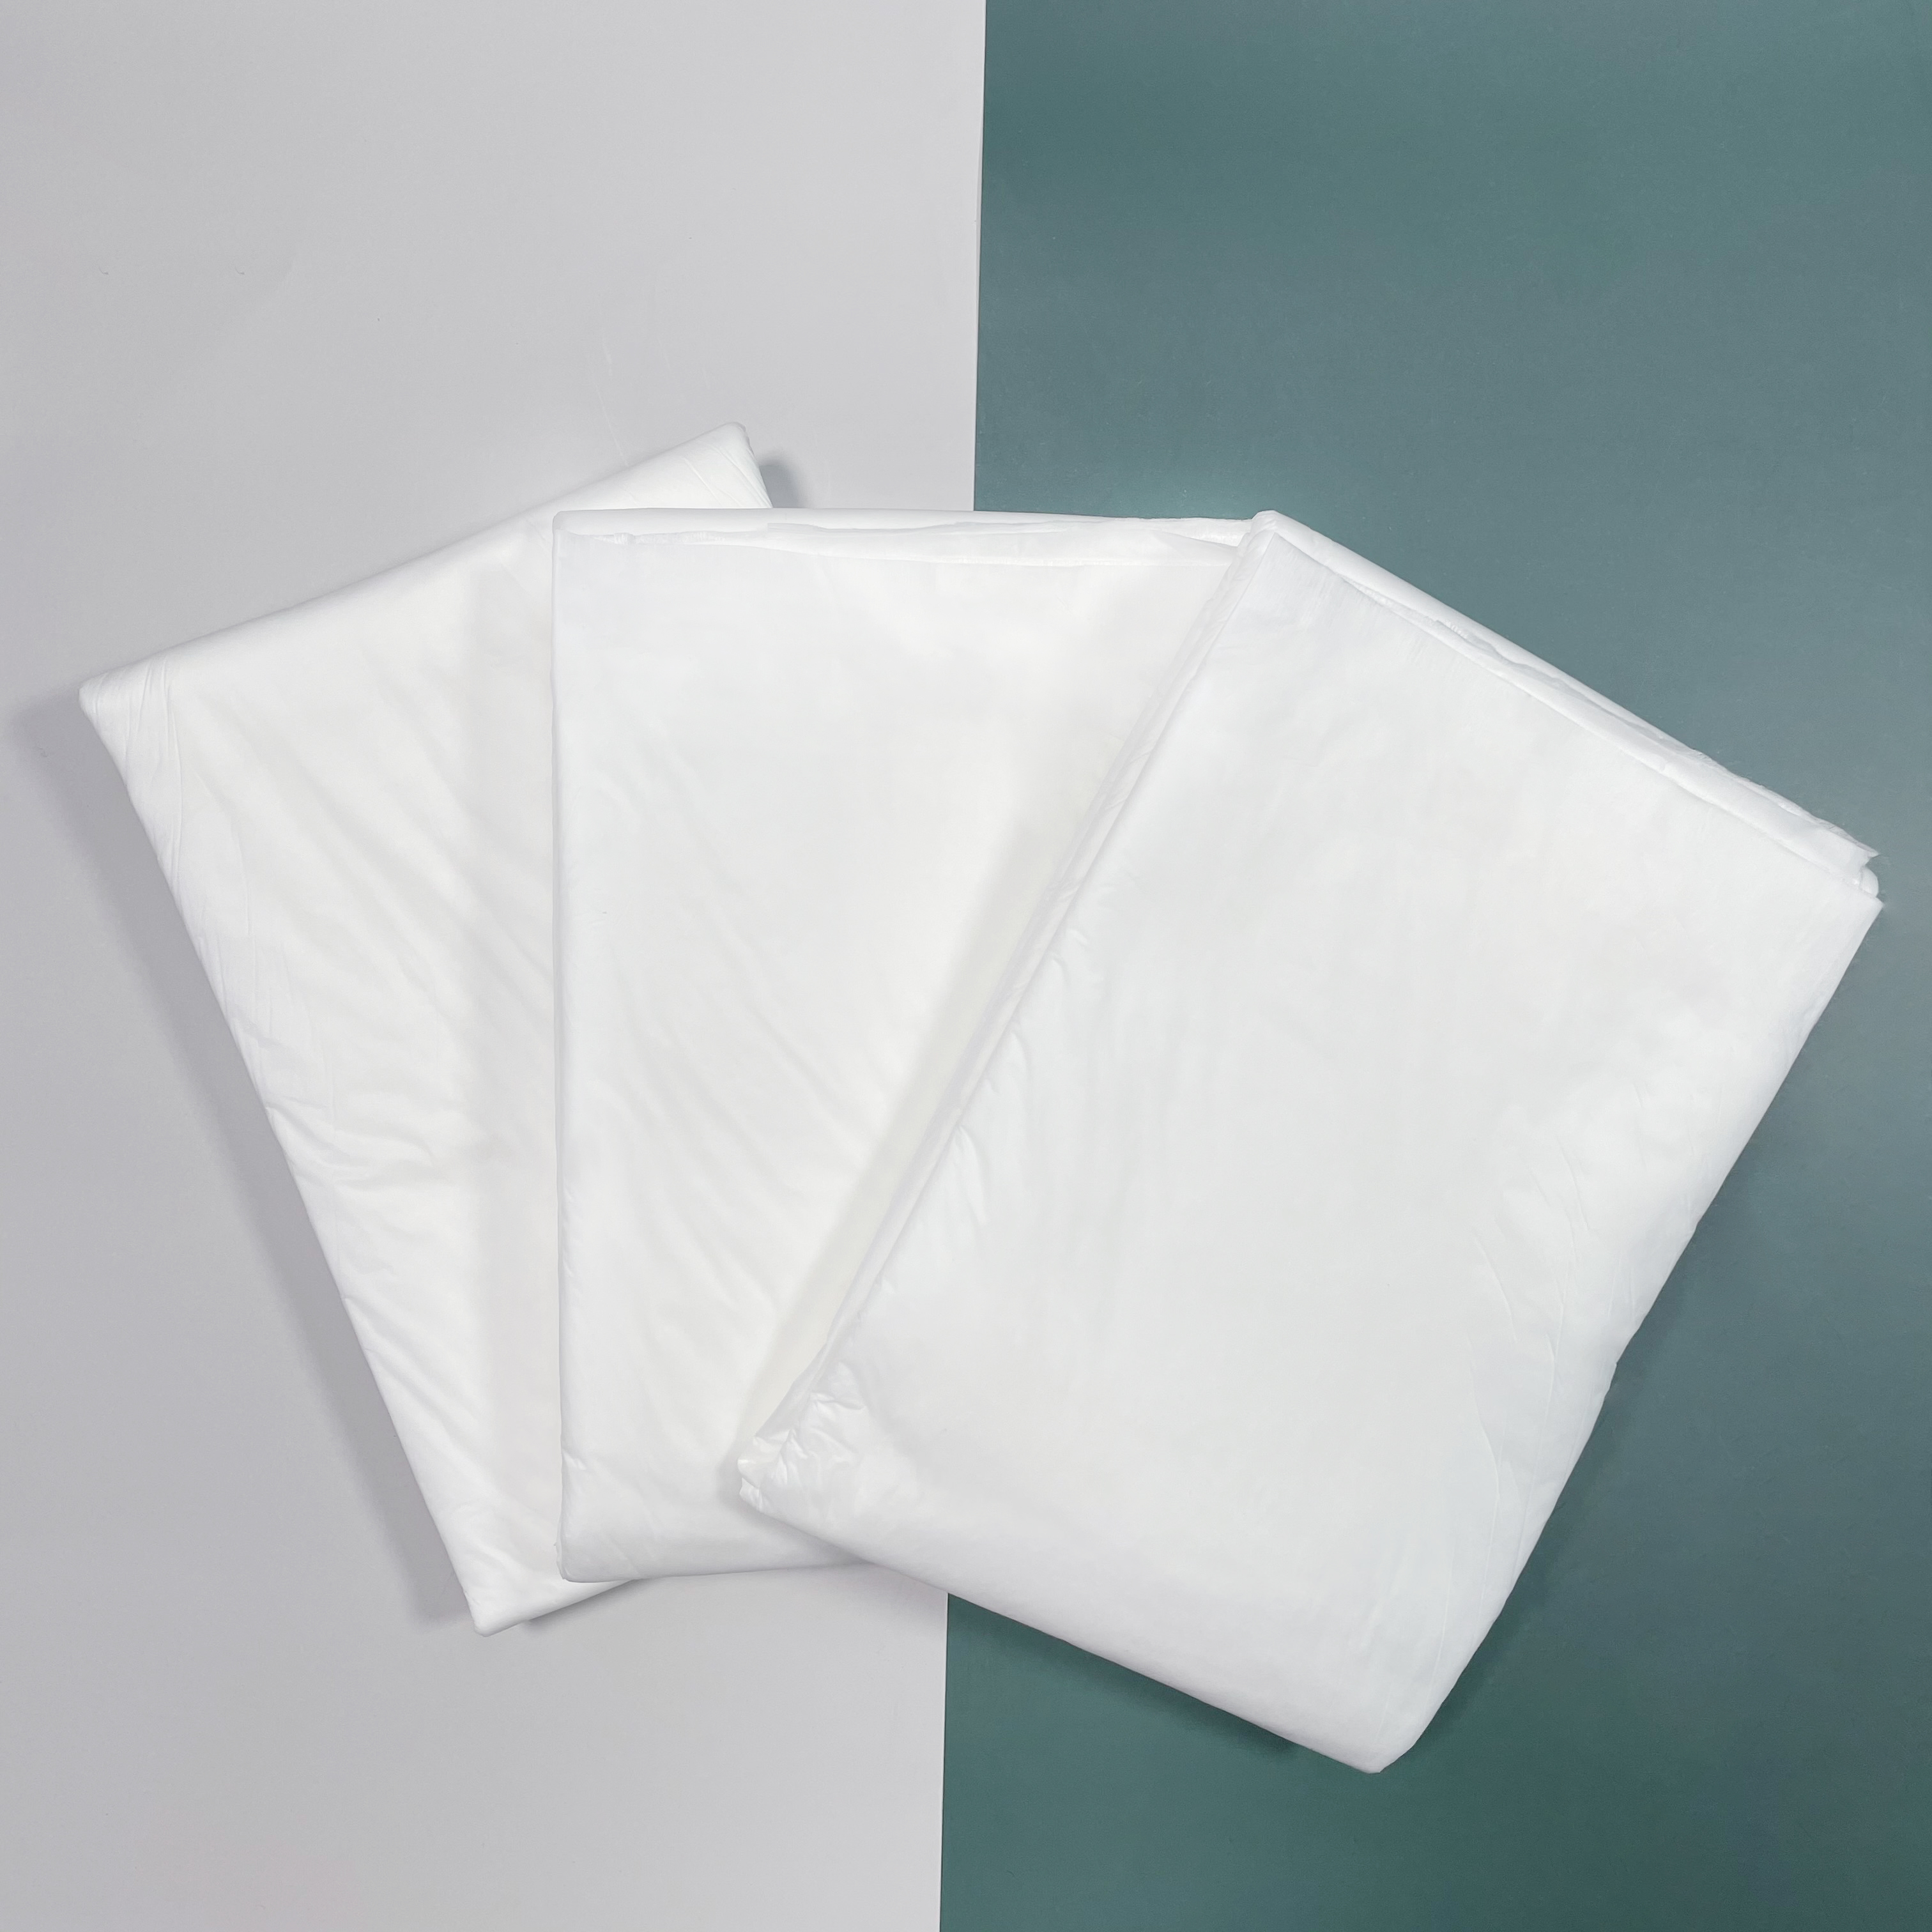 Ngexabiso eliphantsi China Hospital Disposable Surgical Drapes Nursing Mat Absorbent Surgical Underpads for Patient